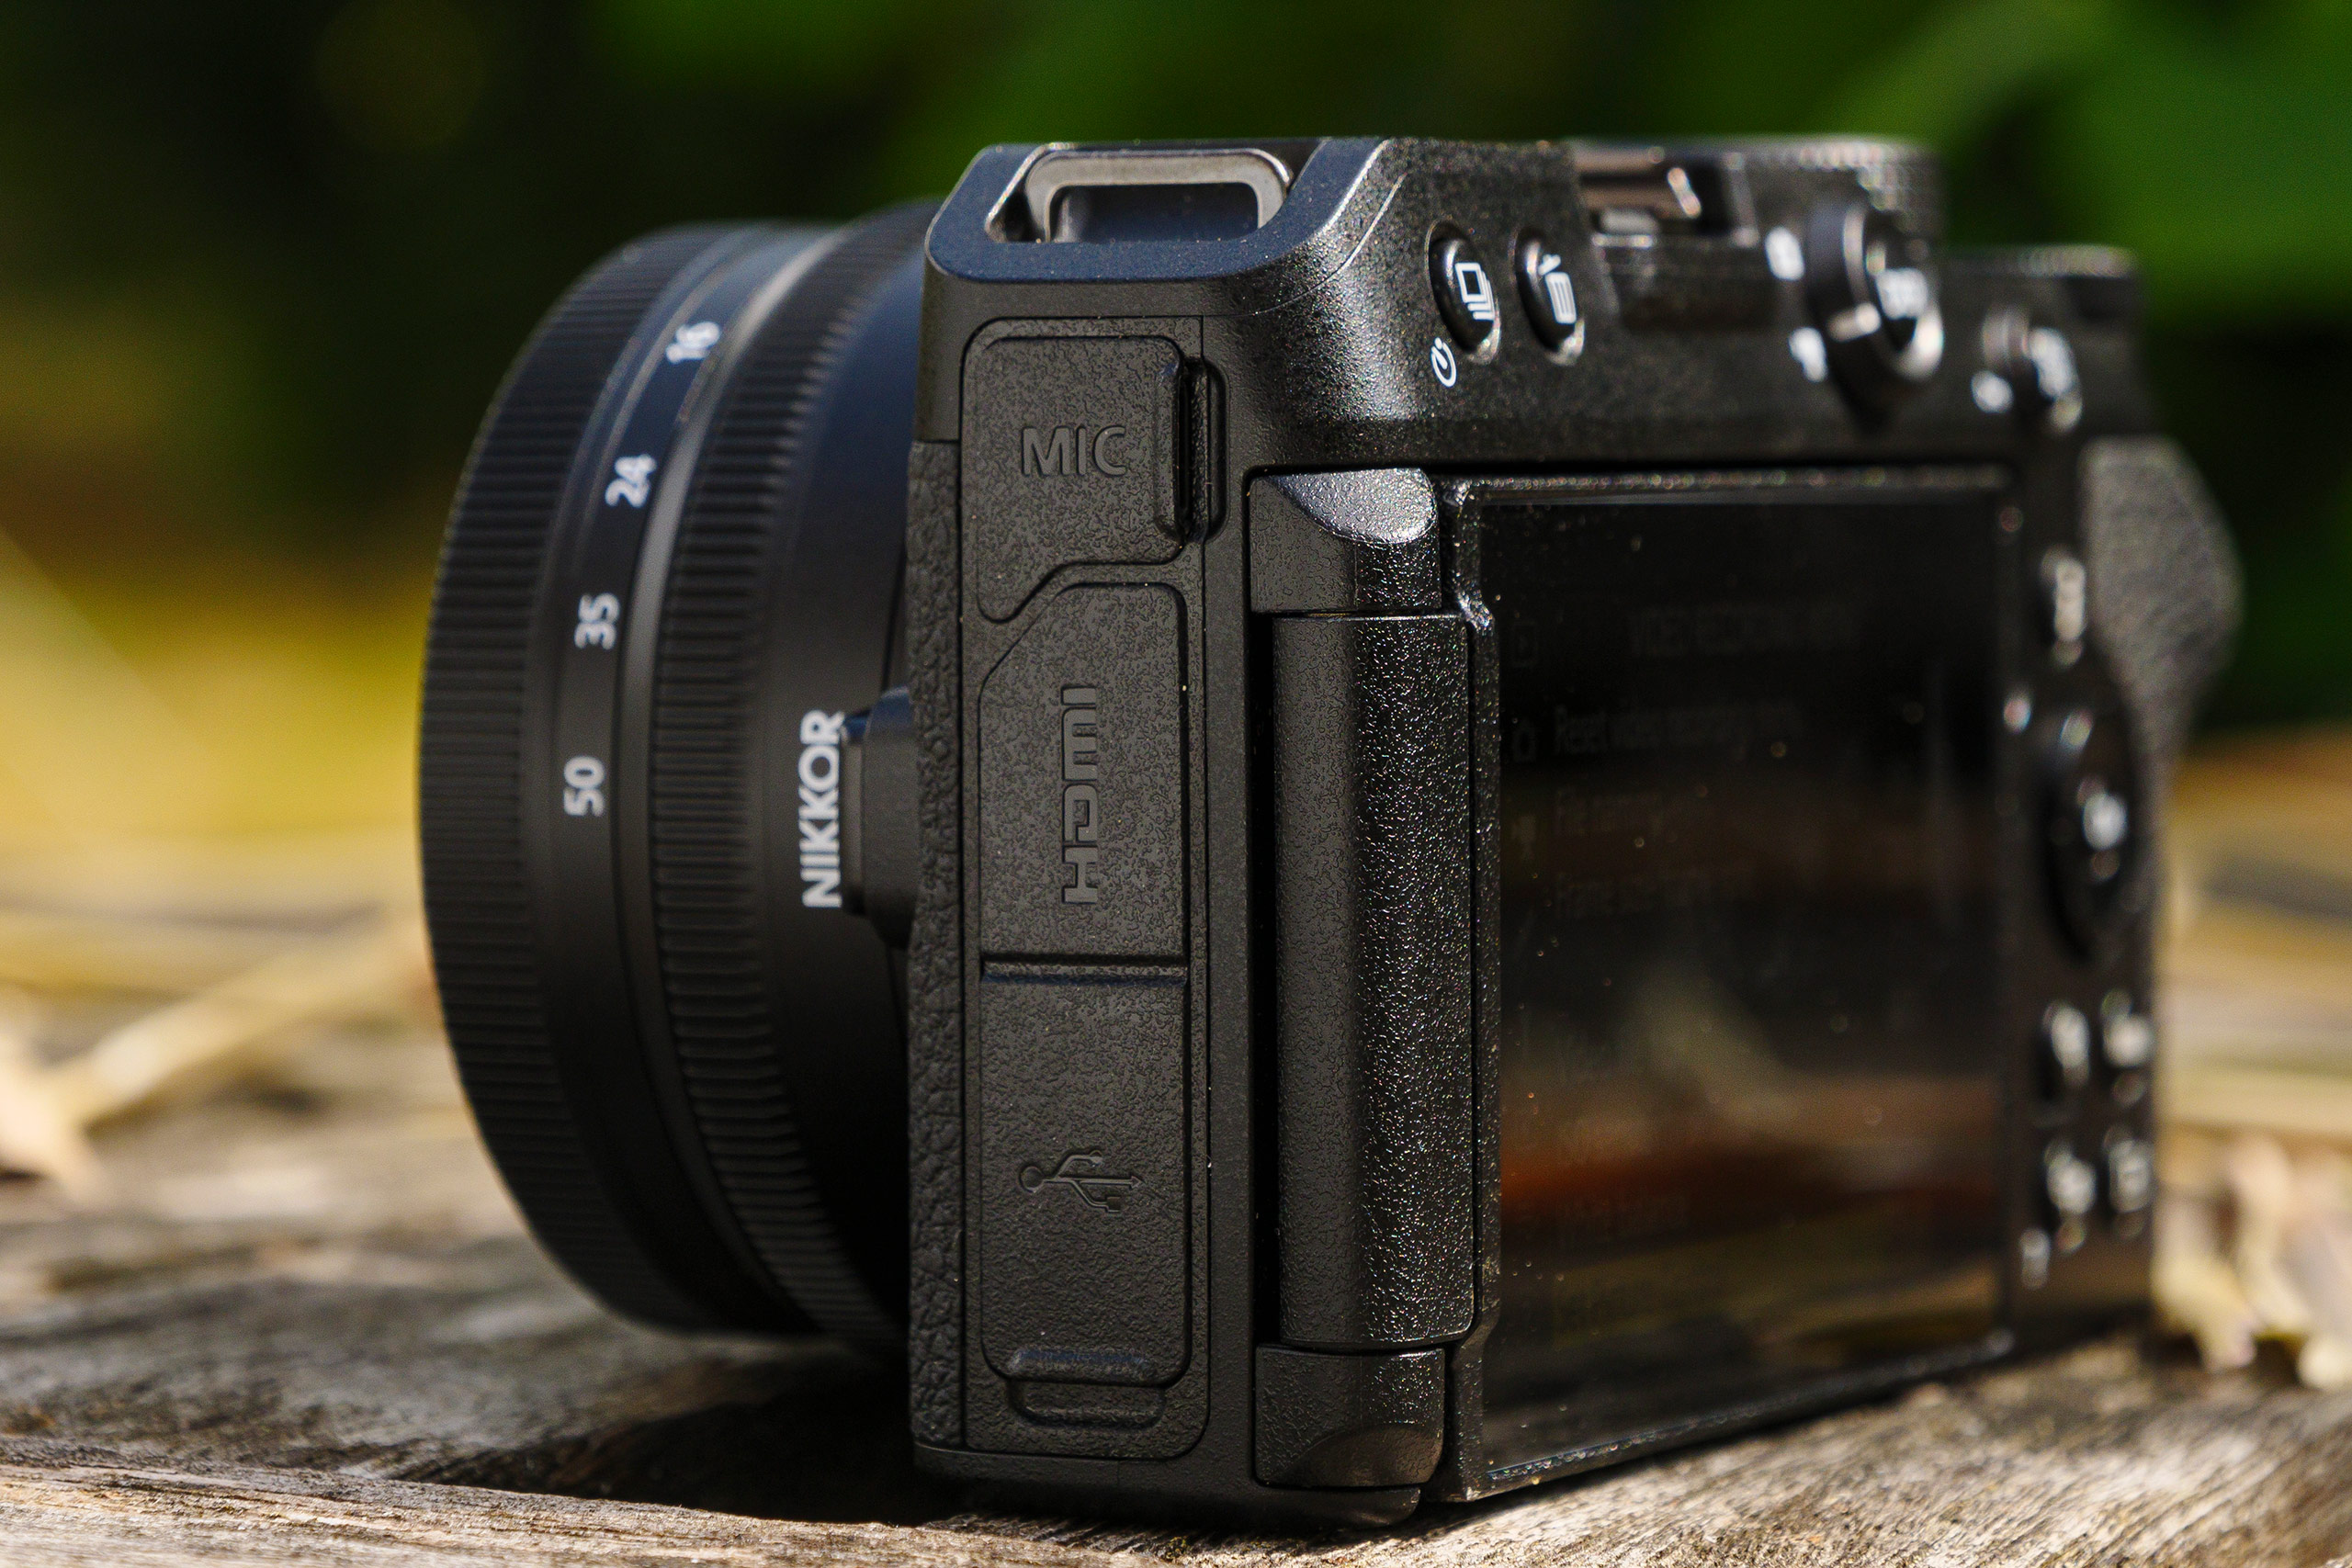 The Nikon Z30 features a mic socket on the side. Photo: Tim Coleman